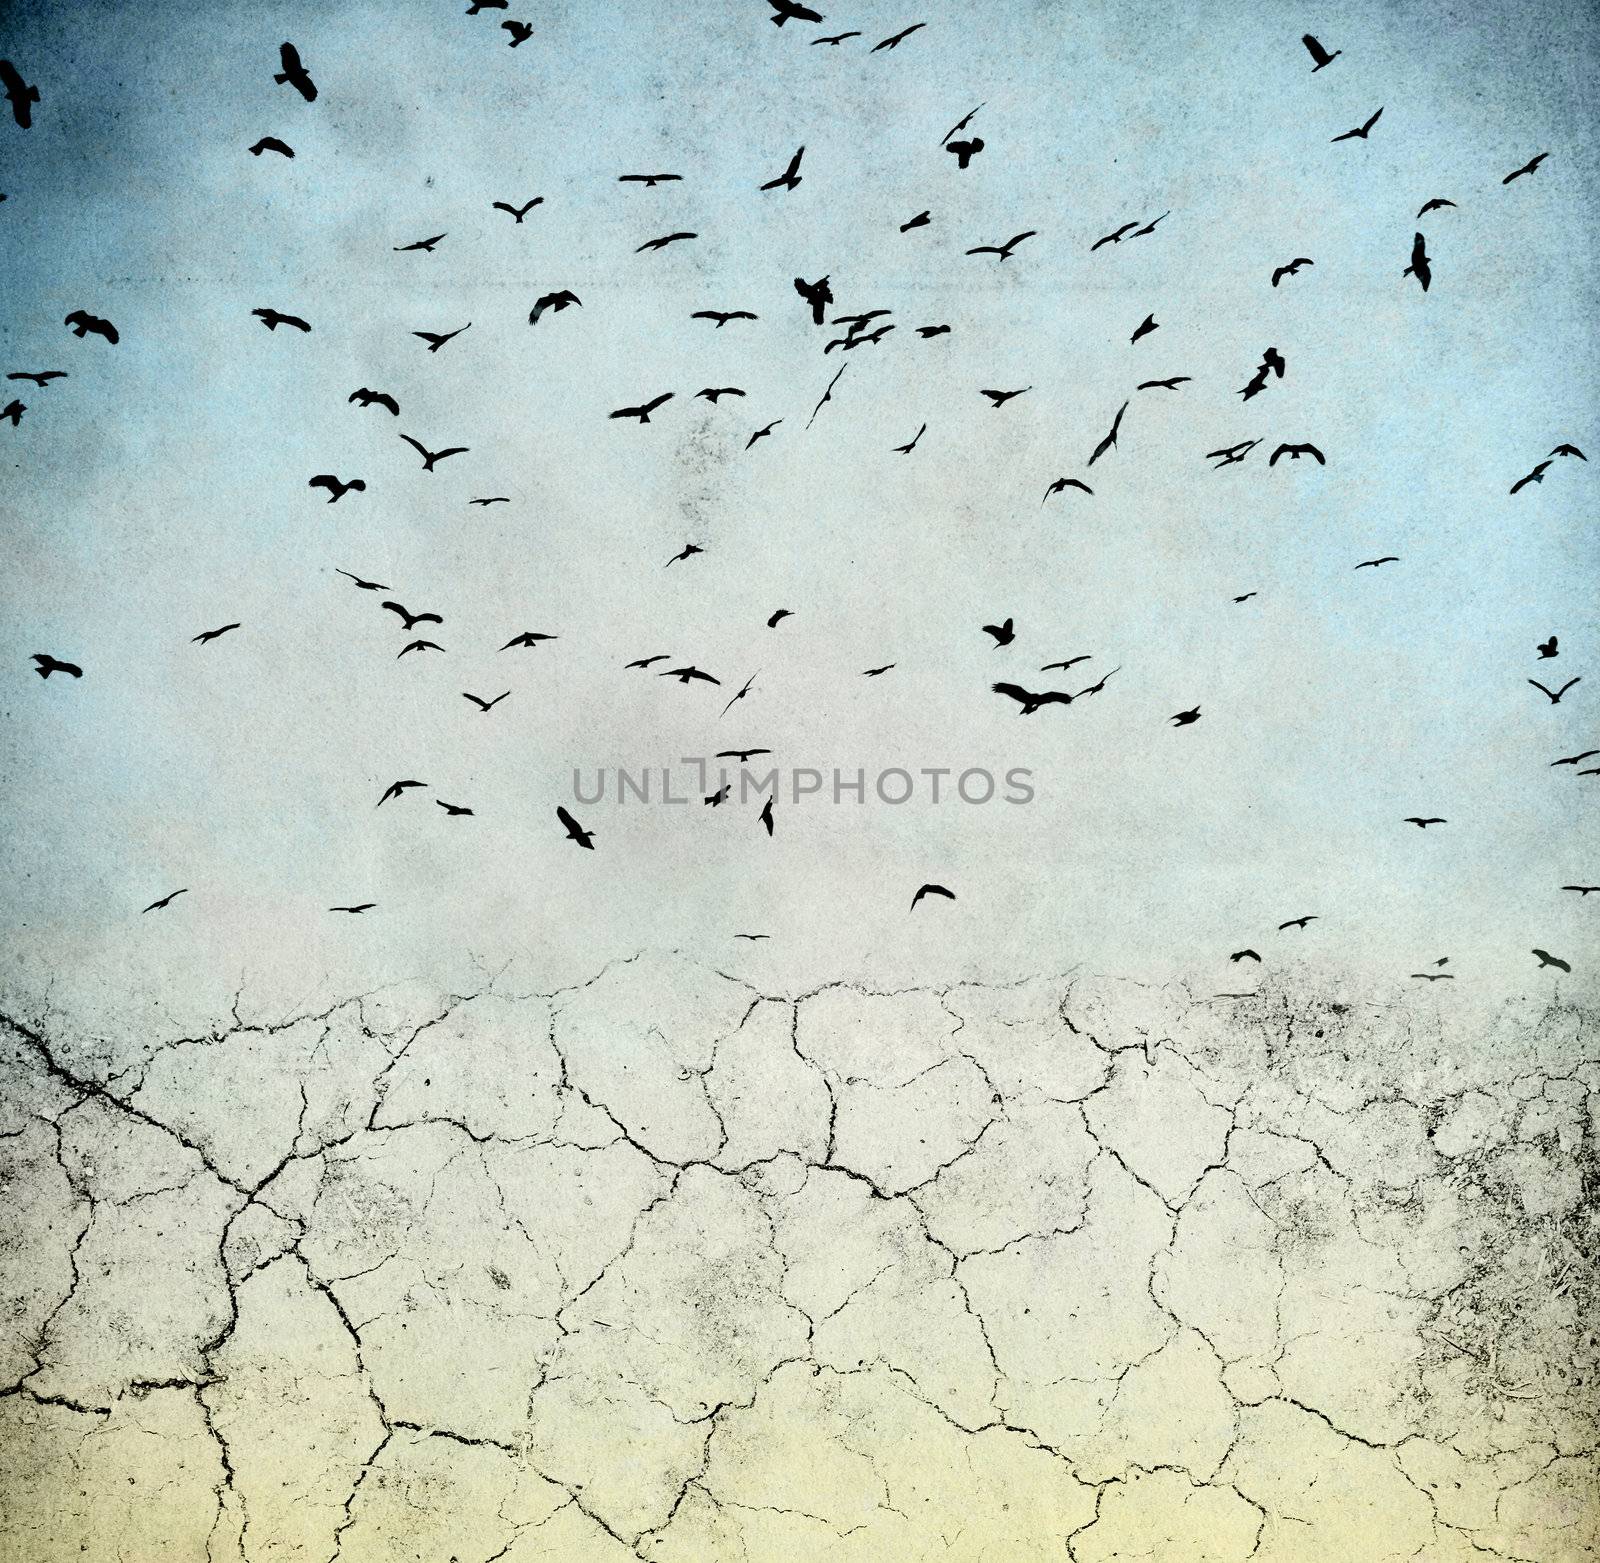 birds in the sky by anelina